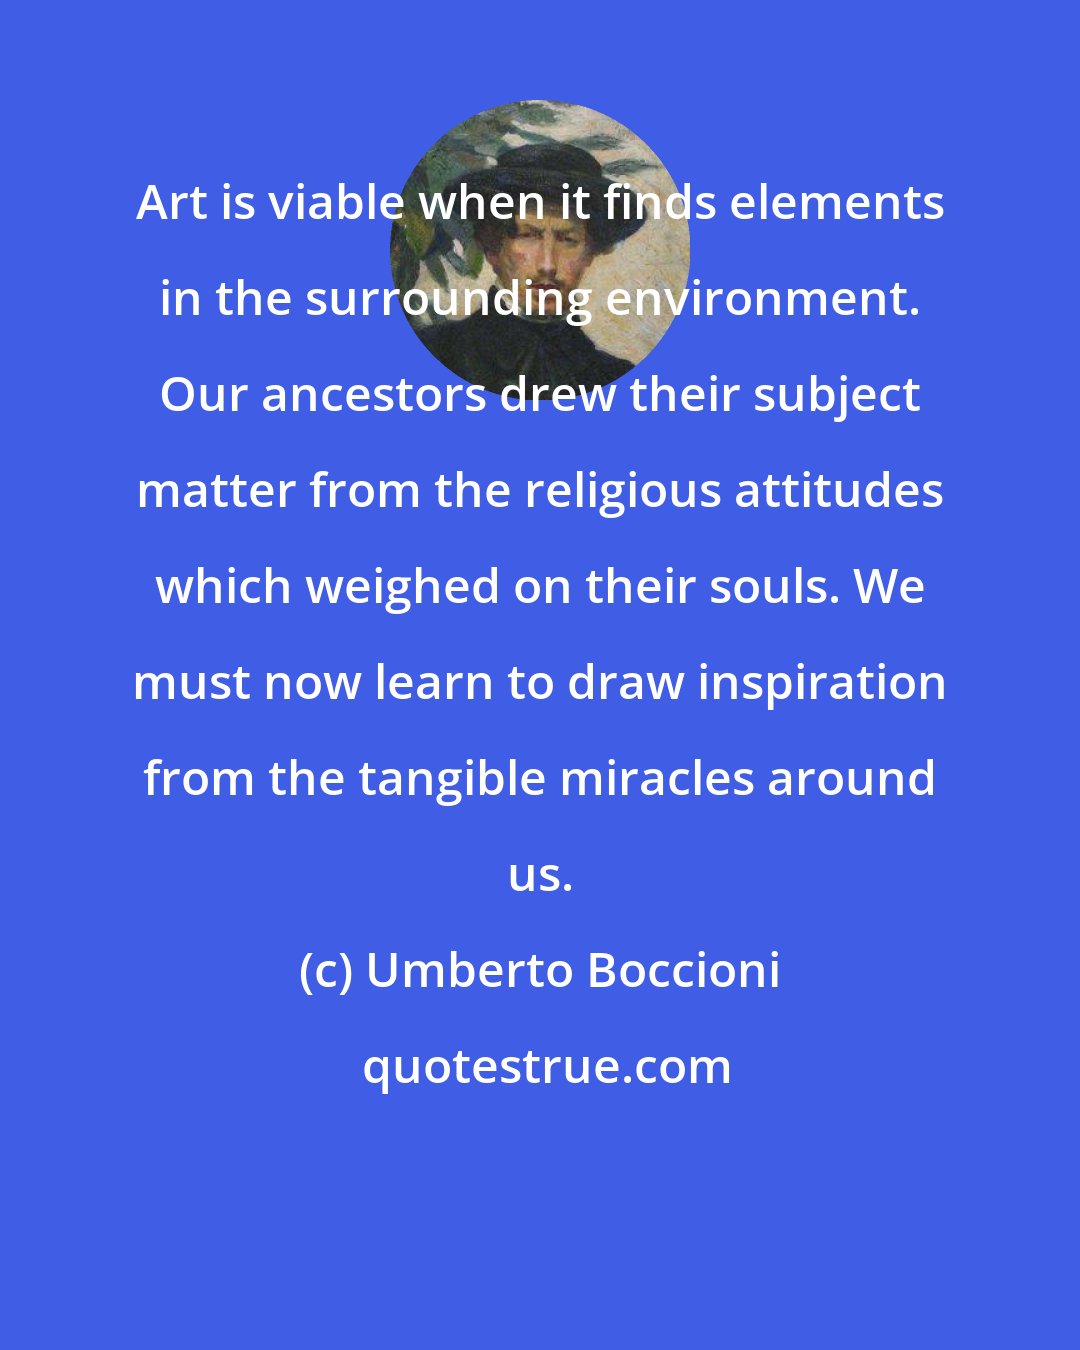 Umberto Boccioni: Art is viable when it finds elements in the surrounding environment. Our ancestors drew their subject matter from the religious attitudes which weighed on their souls. We must now learn to draw inspiration from the tangible miracles around us.